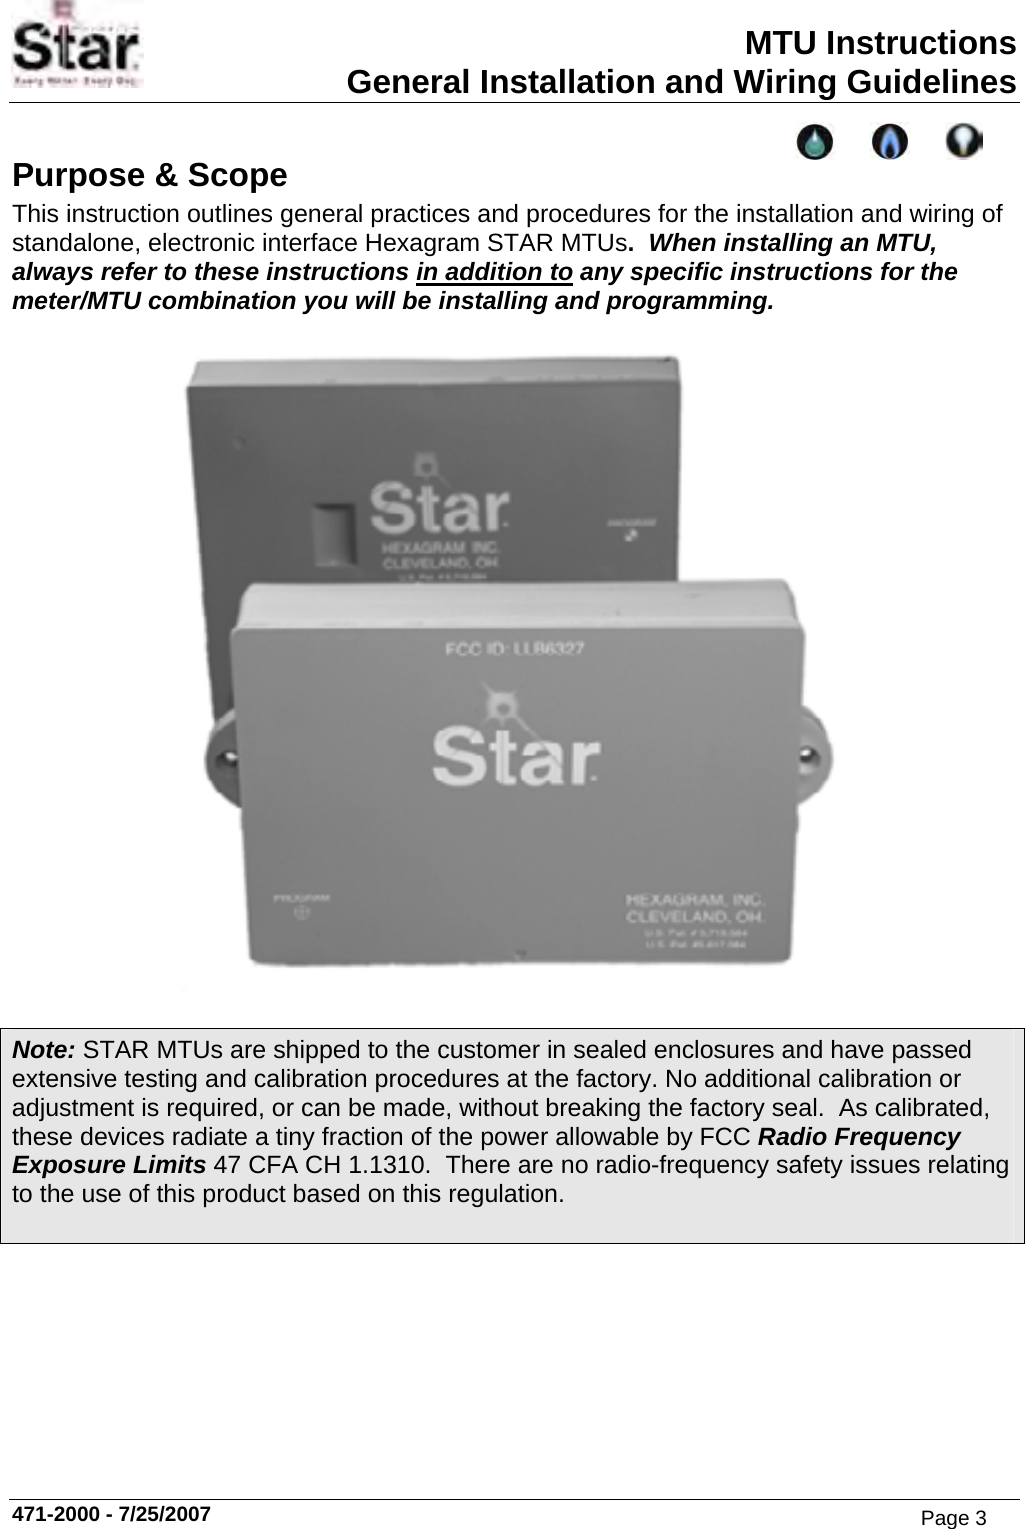 MTU Instructions General Installation and Wiring Guidelines Purpose &amp; Scope This instruction outlines general practices and procedures for the installation and wiring of standalone, electronic interface Hexagram STAR MTUs.  When installing an MTU, always refer to these instructions in addition to any specific instructions for the meter/MTU combination you will be installing and programming.   Note: STAR MTUs are shipped to the customer in sealed enclosures and have passed extensive testing and calibration procedures at the factory. No additional calibration or adjustment is required, or can be made, without breaking thefactory seal.  As calibrated, these devices radiate a tiny fraction of the power allowable byFCC Radio Frequency Exposure Limits 47 CFA CH 1.1310.  There are no radio-frequency safety issues relating to the use of this product based on this regulation.  471-2000 - 7/25/2007 Page 3